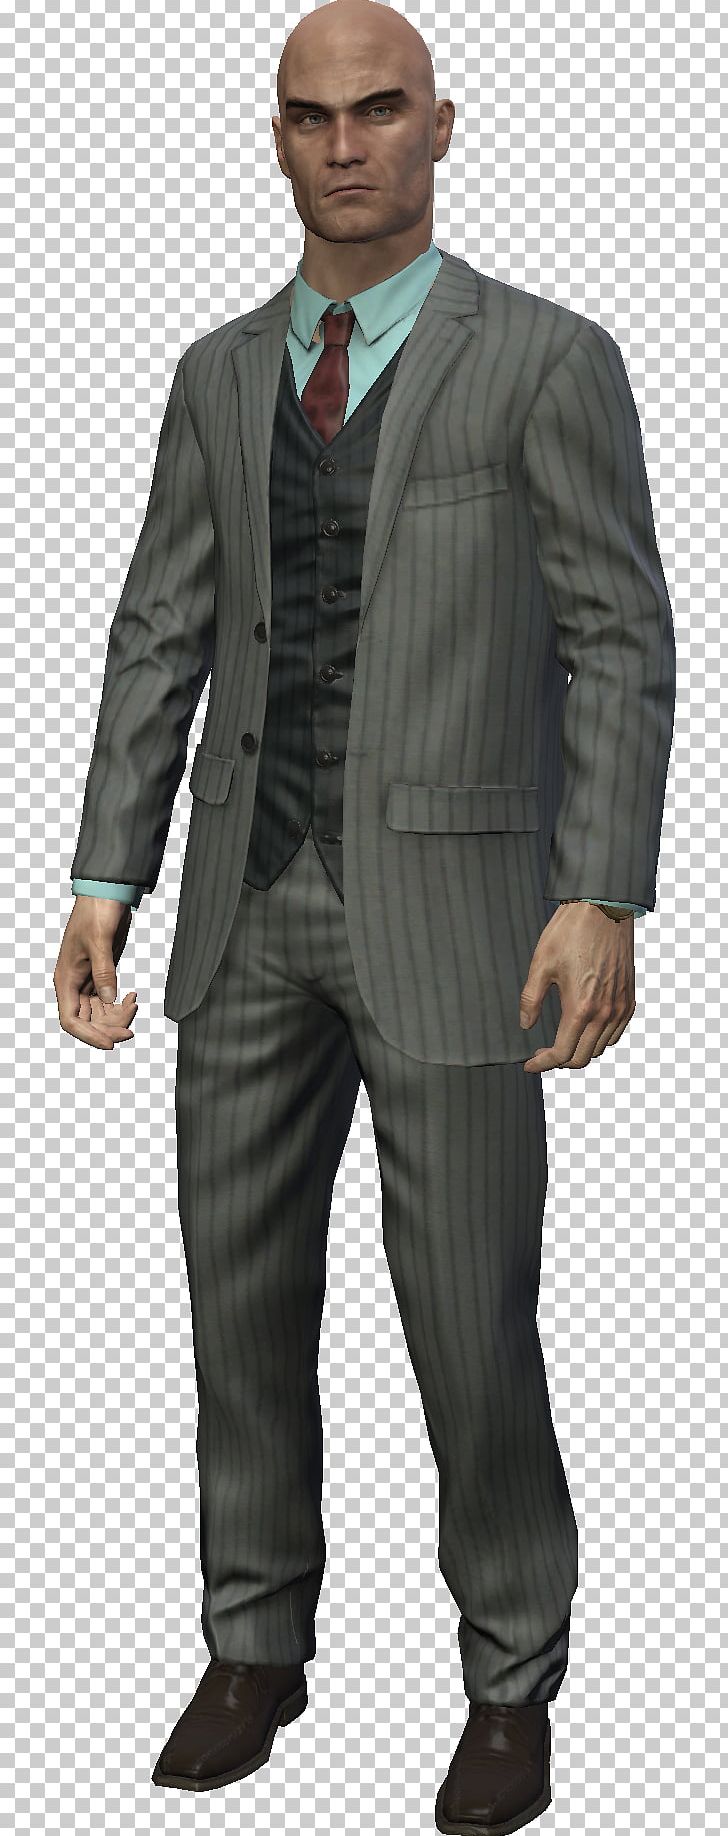 Hitman: Absolution Agent 47 Suit Costume PNG, Clipart, Agent 47, Arms Trafficking, Businessperson, Clothing, Costume Free PNG Download